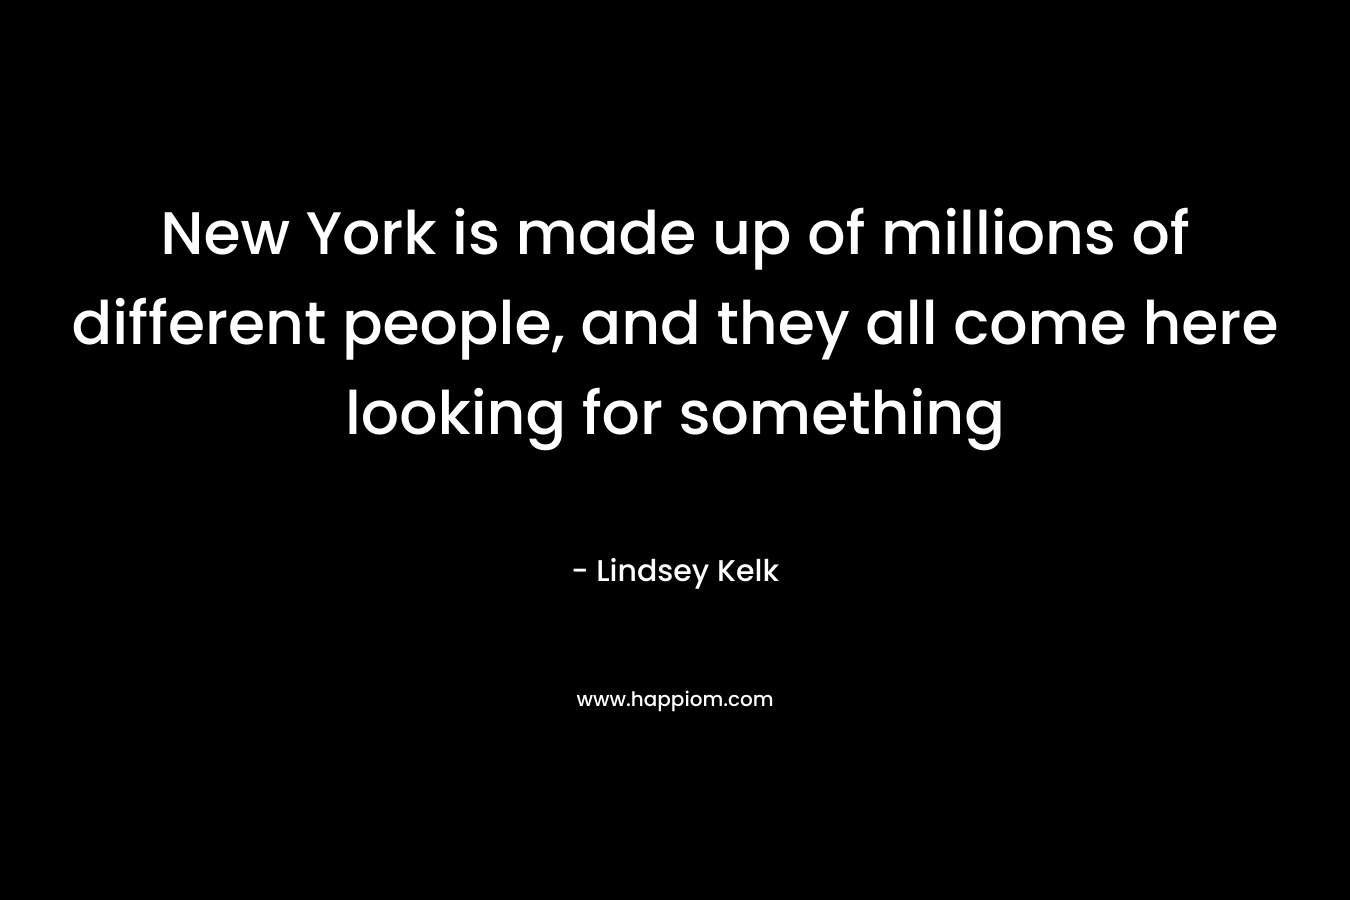 New York is made up of millions of different people, and they all come here looking for something – Lindsey Kelk